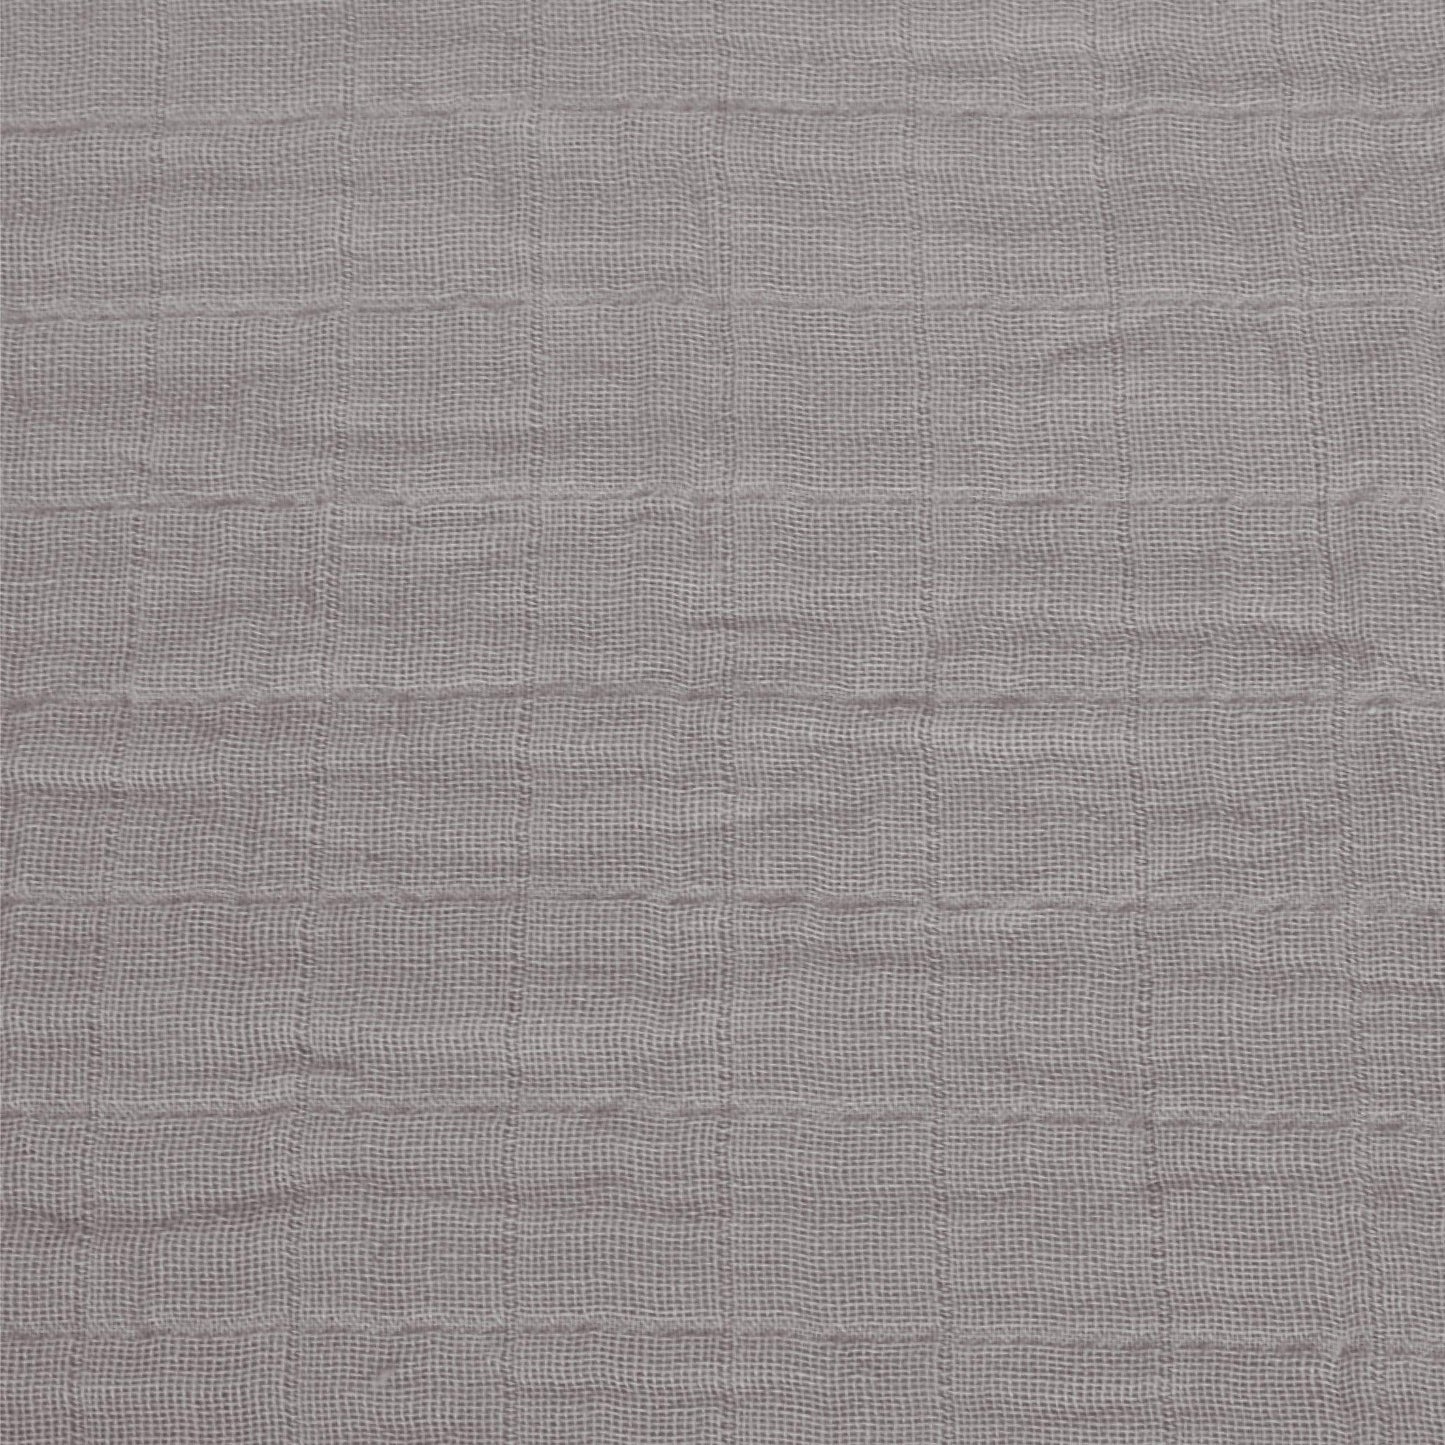 Cotton muslin change pad cover - taupe